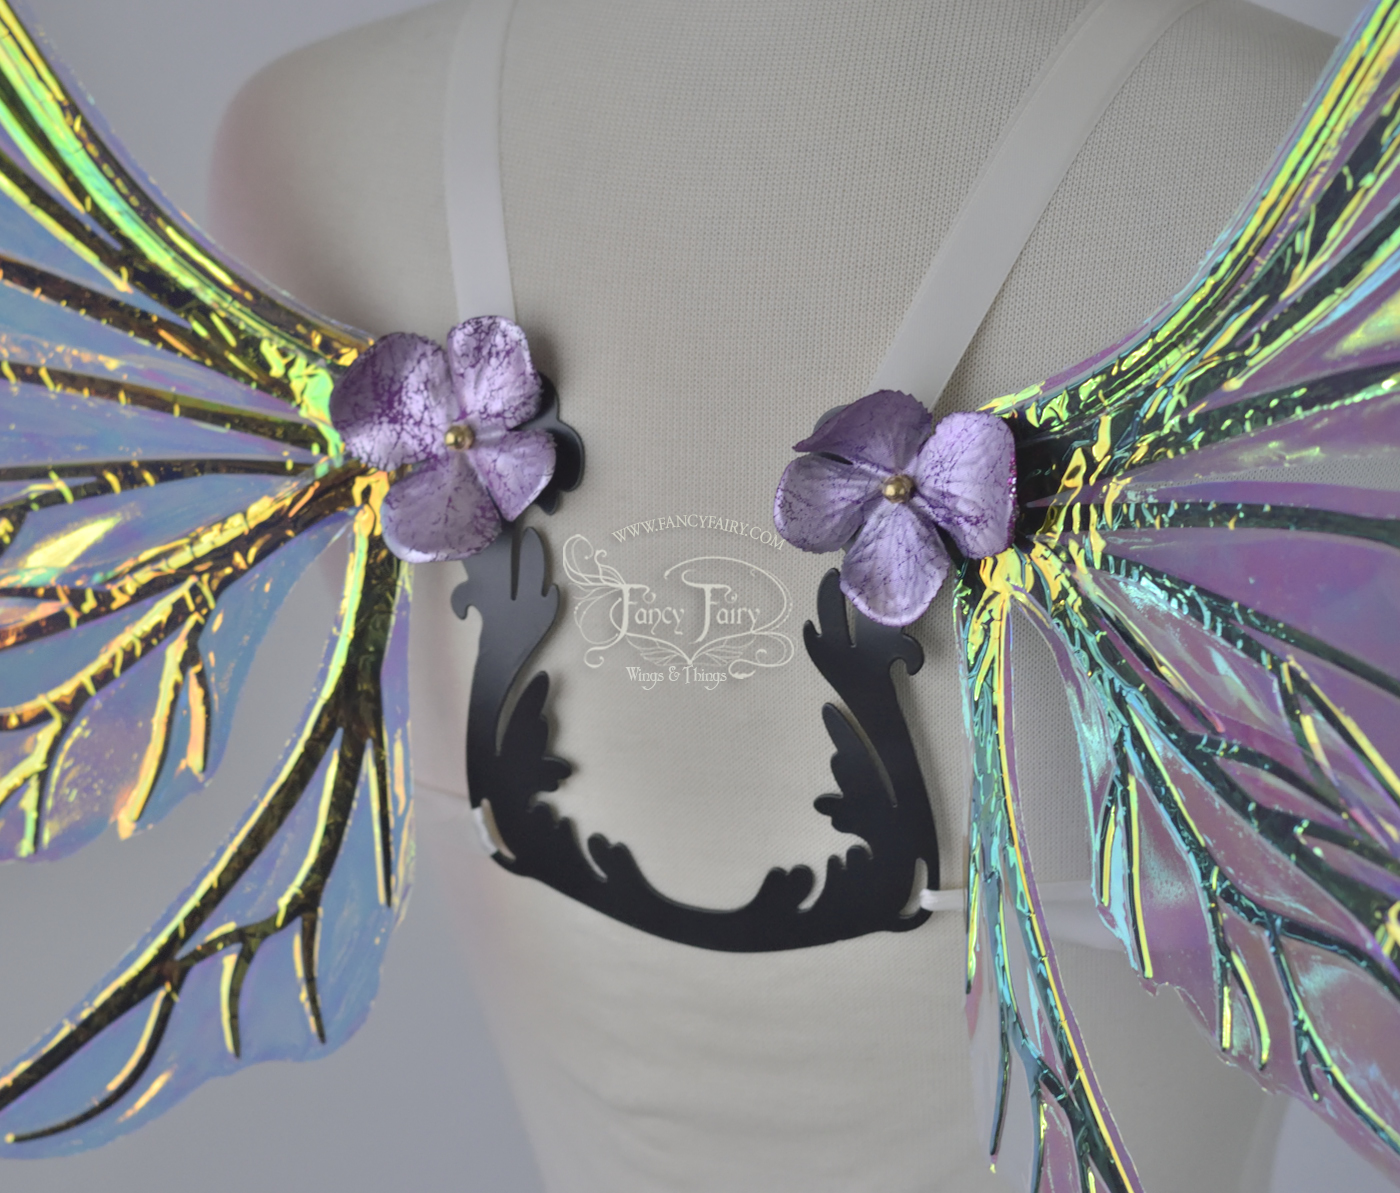 Ready to Ship Extra Large Elvina Iridescent Convertible Fairy Wings in Clear Diamond Fire with Black veins